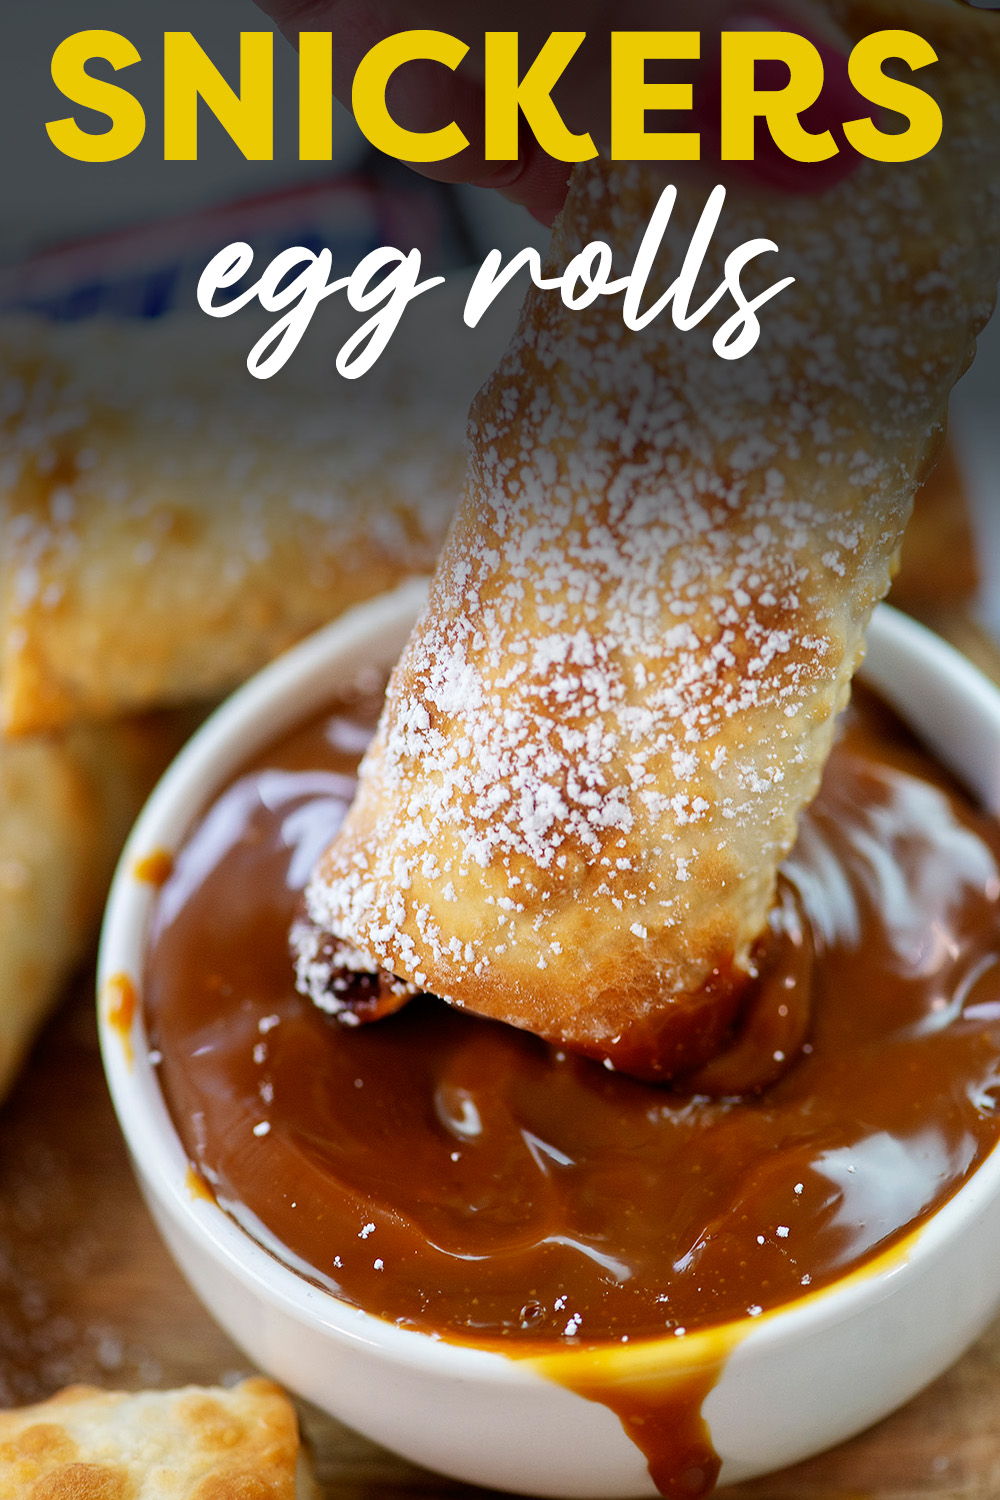 An egg roll being dipped into caramel sauce.